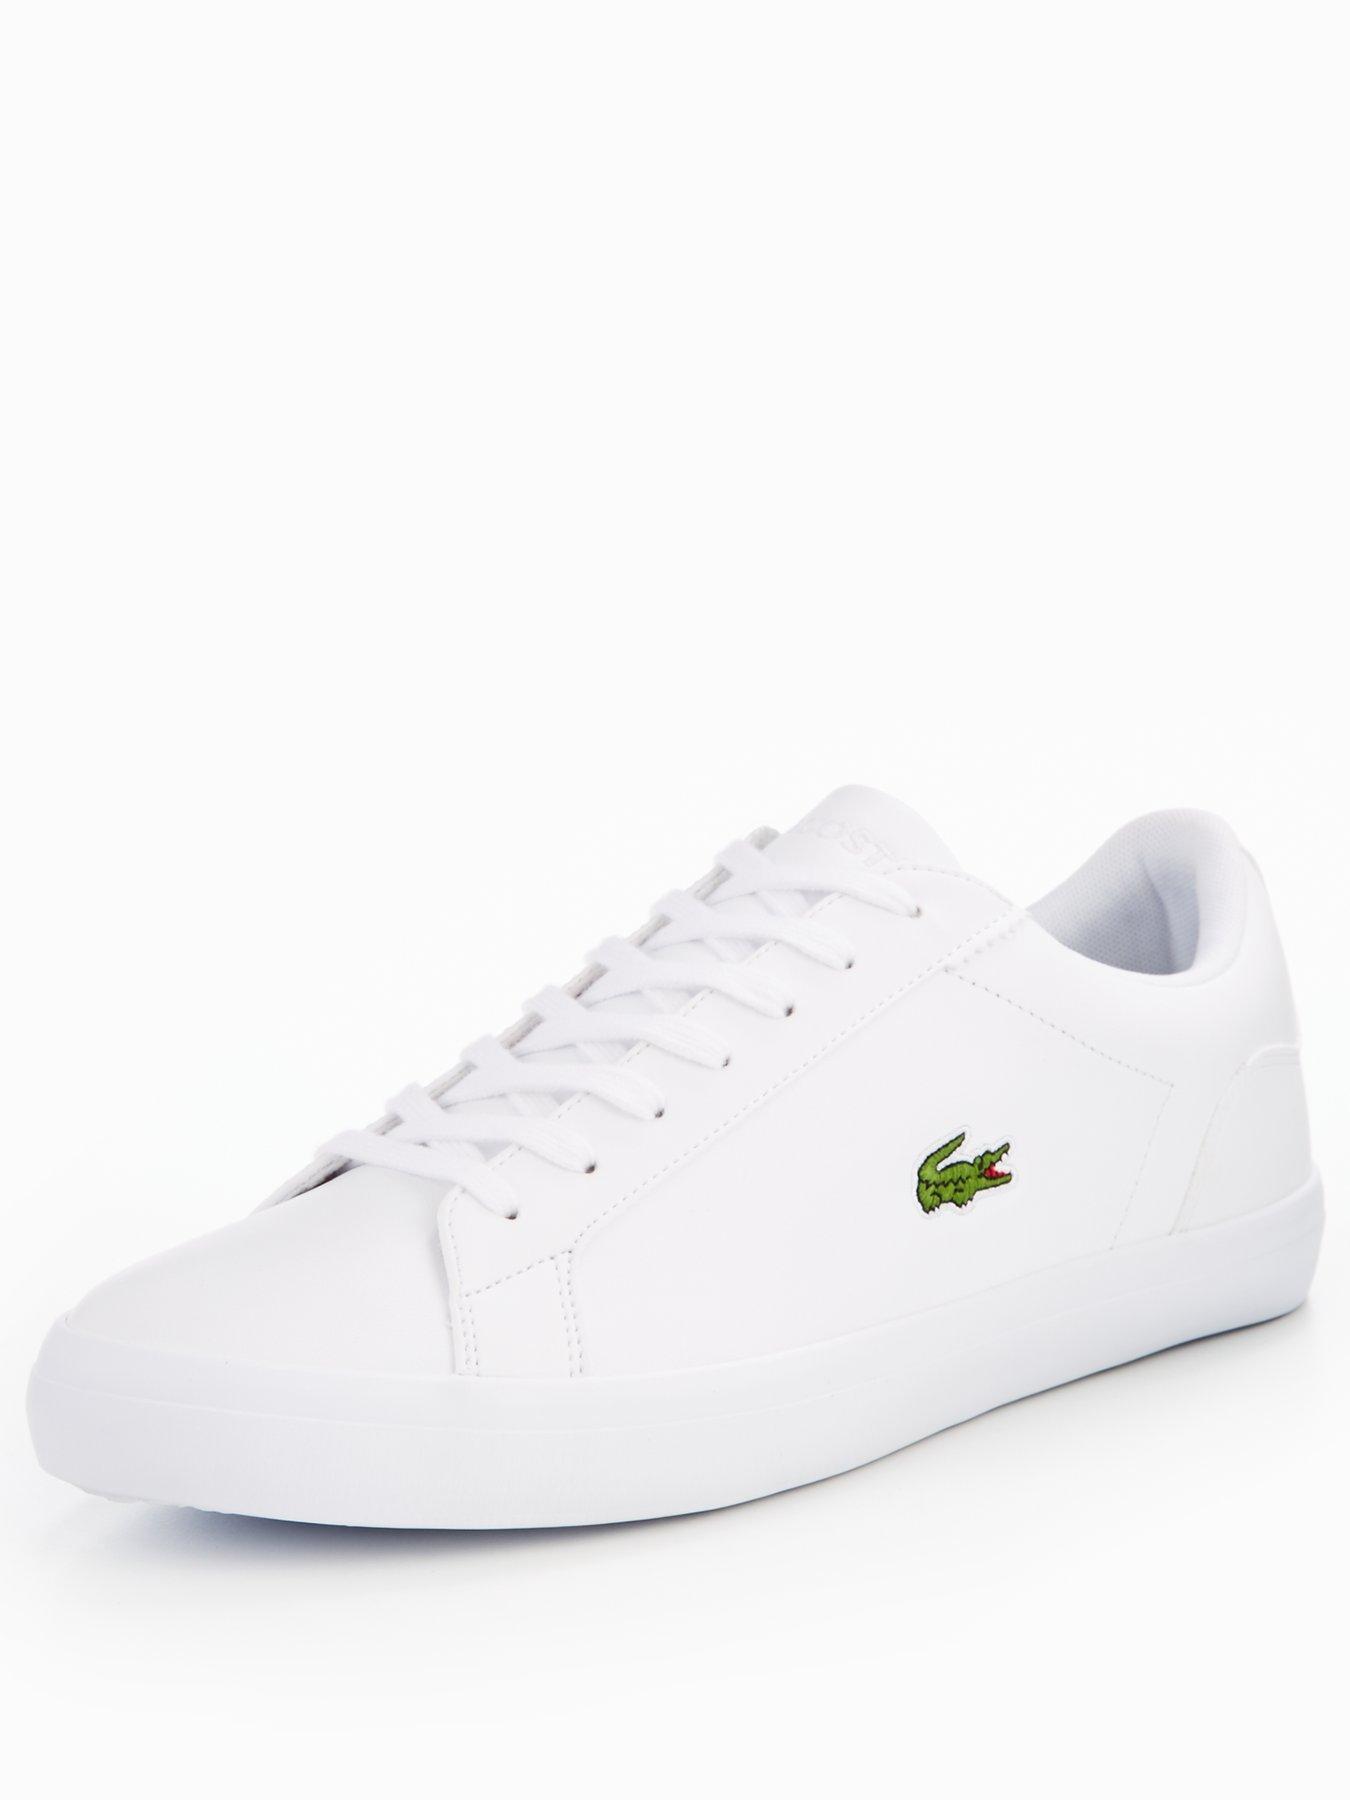 stores that sell lacoste shoes